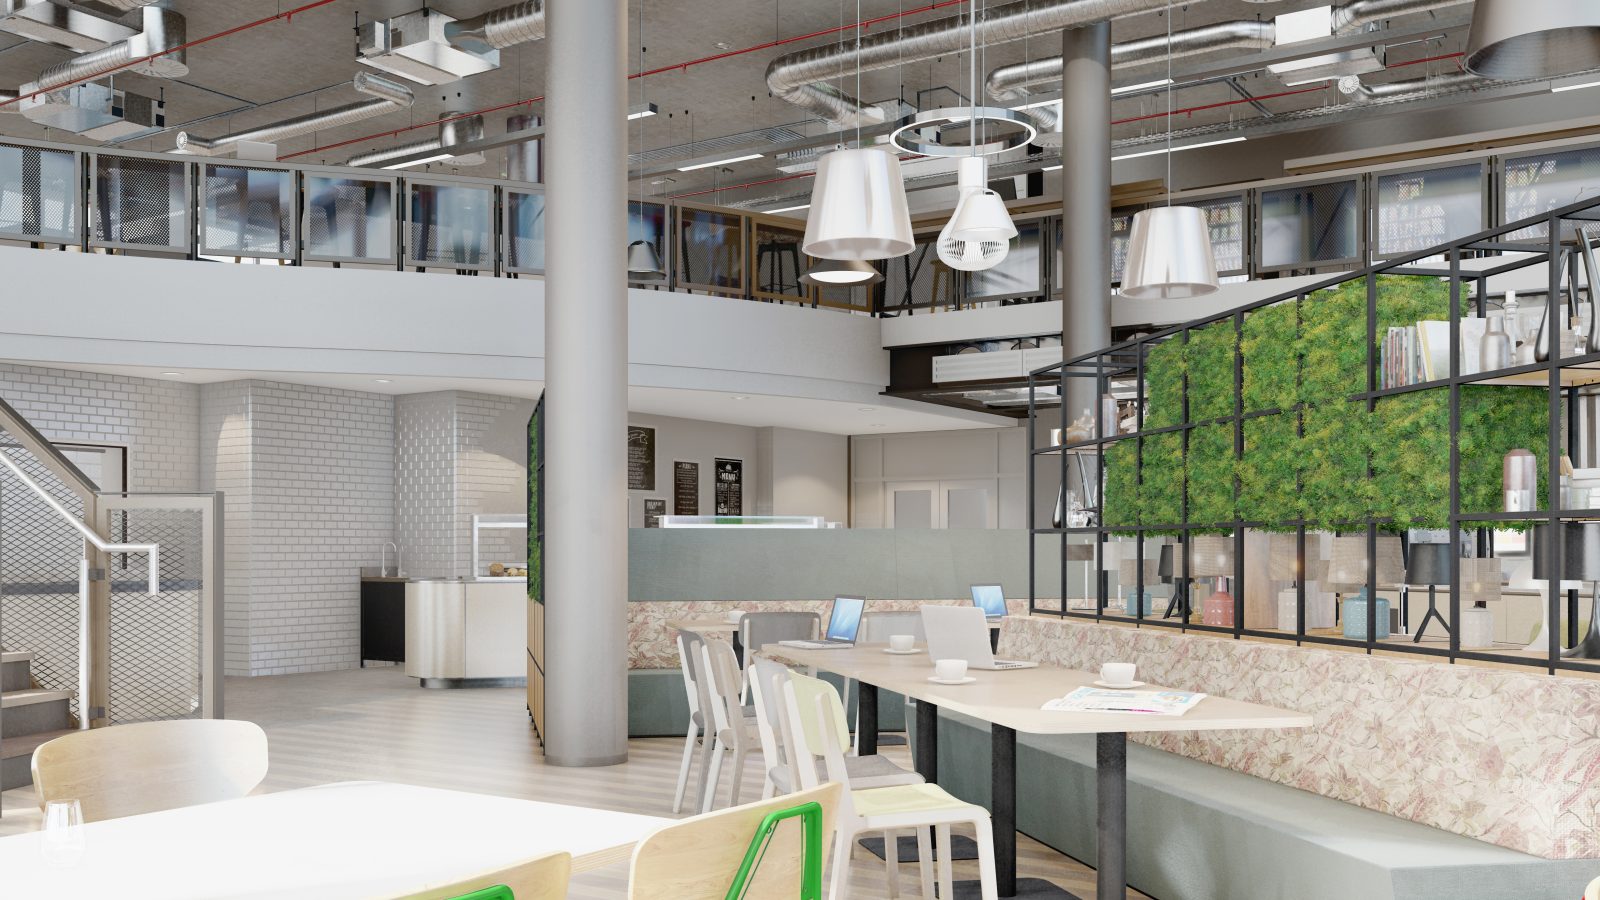 We’re making changes: Office Fit-Out firm Claremont becomes employee owned